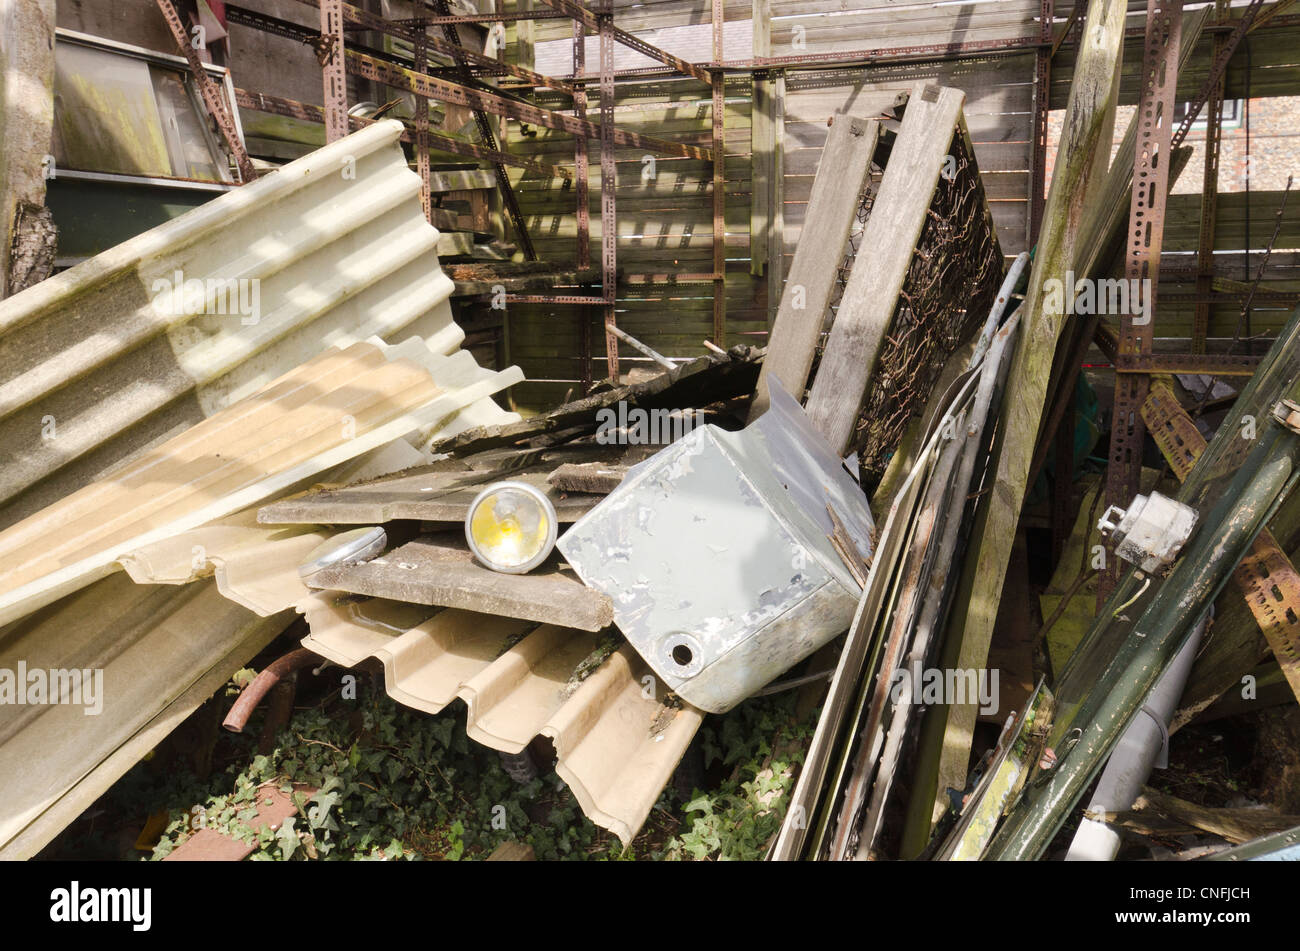 A pile of  discarded corrugated plastic, asbestos, debris and assorted filth and rubbish Stock Photo